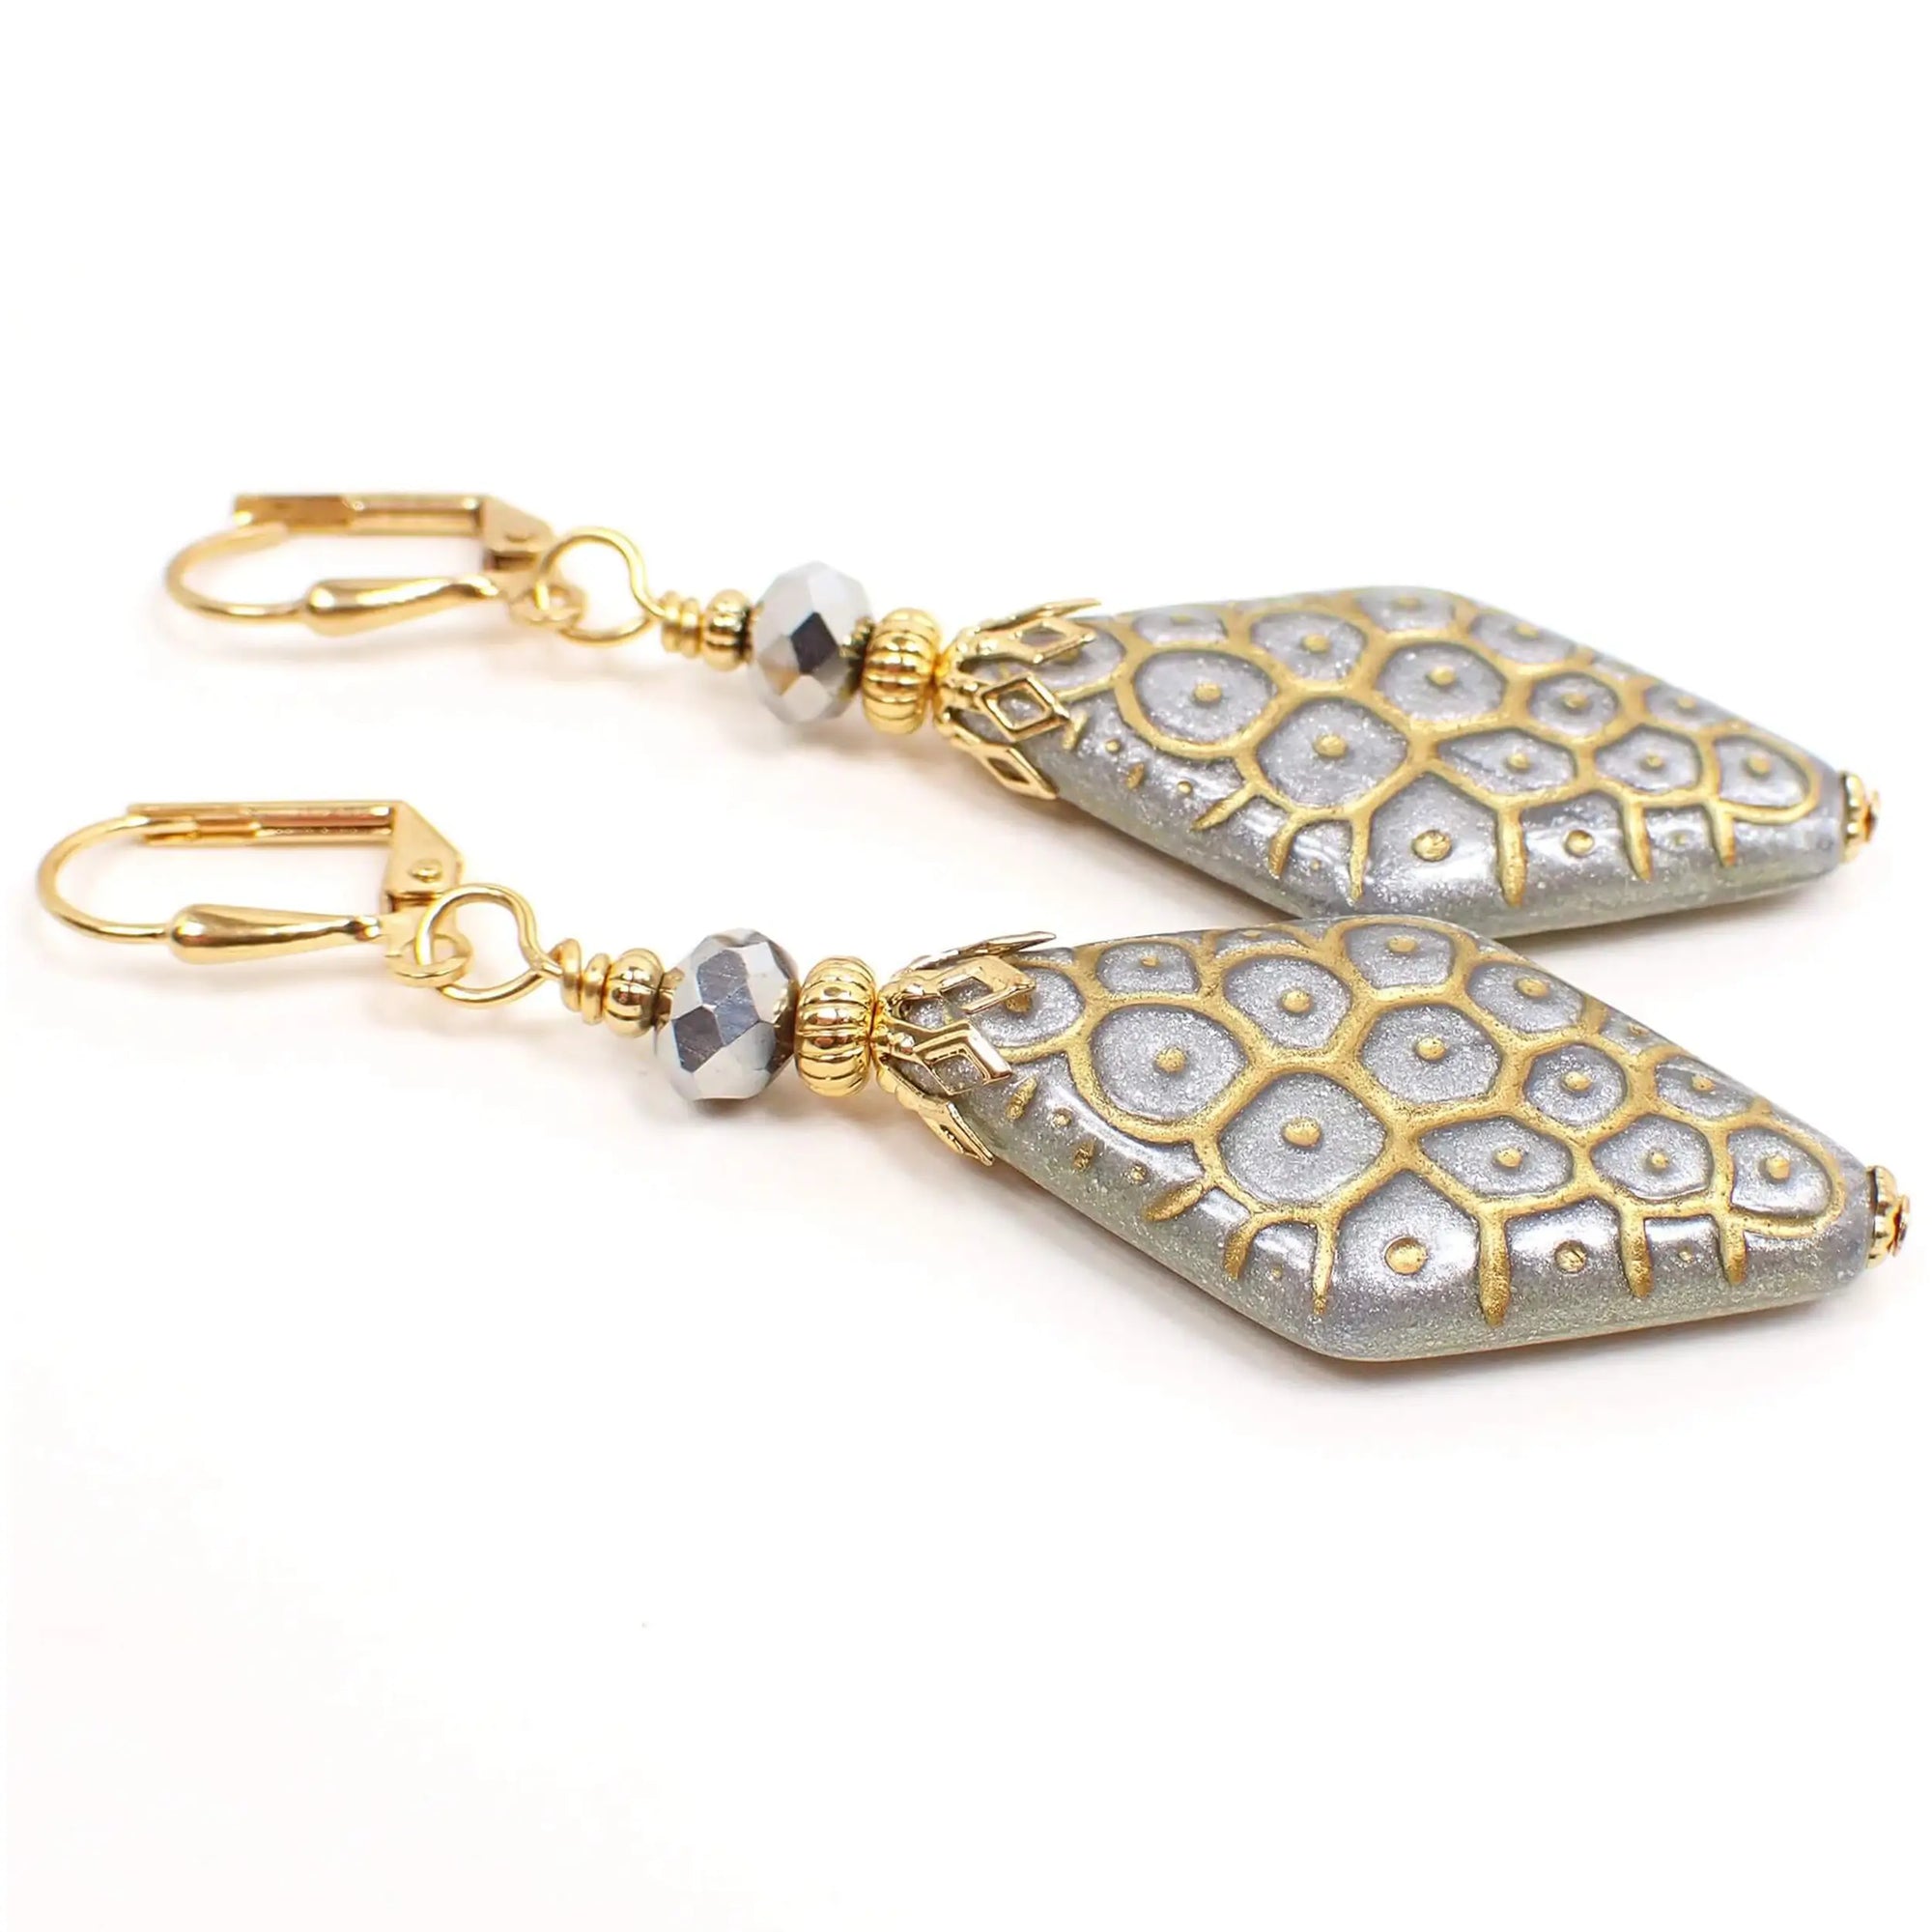 Angled view of the handmade metallic drop earrings made with vintage lucite beads. The metal is gold tone plated in color. There are faceted silver color glass beads at the top. The bottom lucite beads have a puffy flat diamond shape and are metallic silver in color. There is a scale like textured pattern design on them that is in metallic gold color.